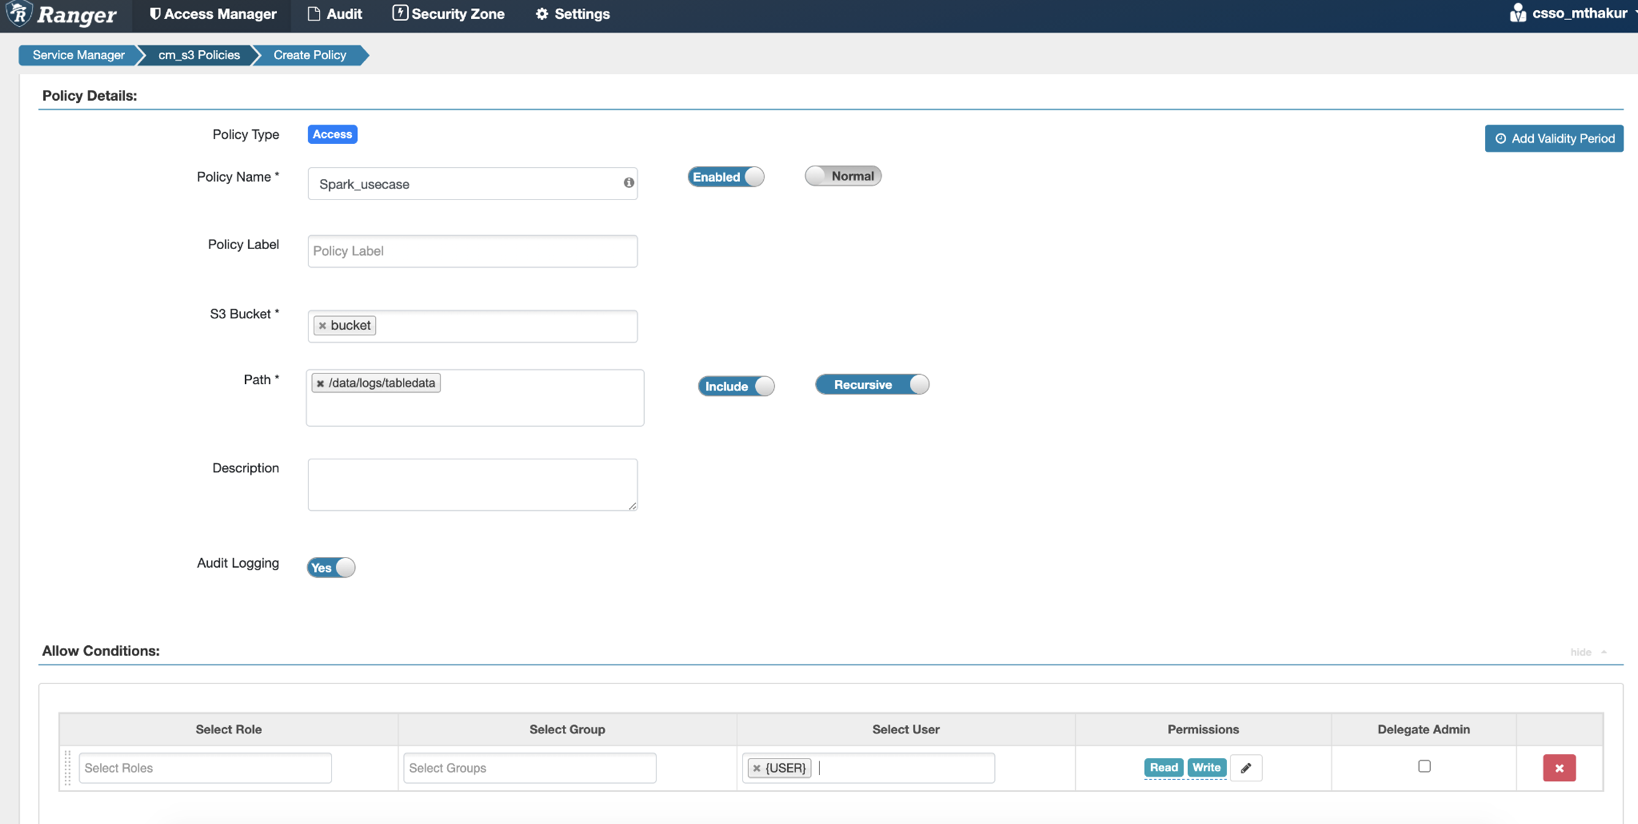 The image shows the Create Policy page in Ranger UI to create an S3 policy on an S3 path for an end user.